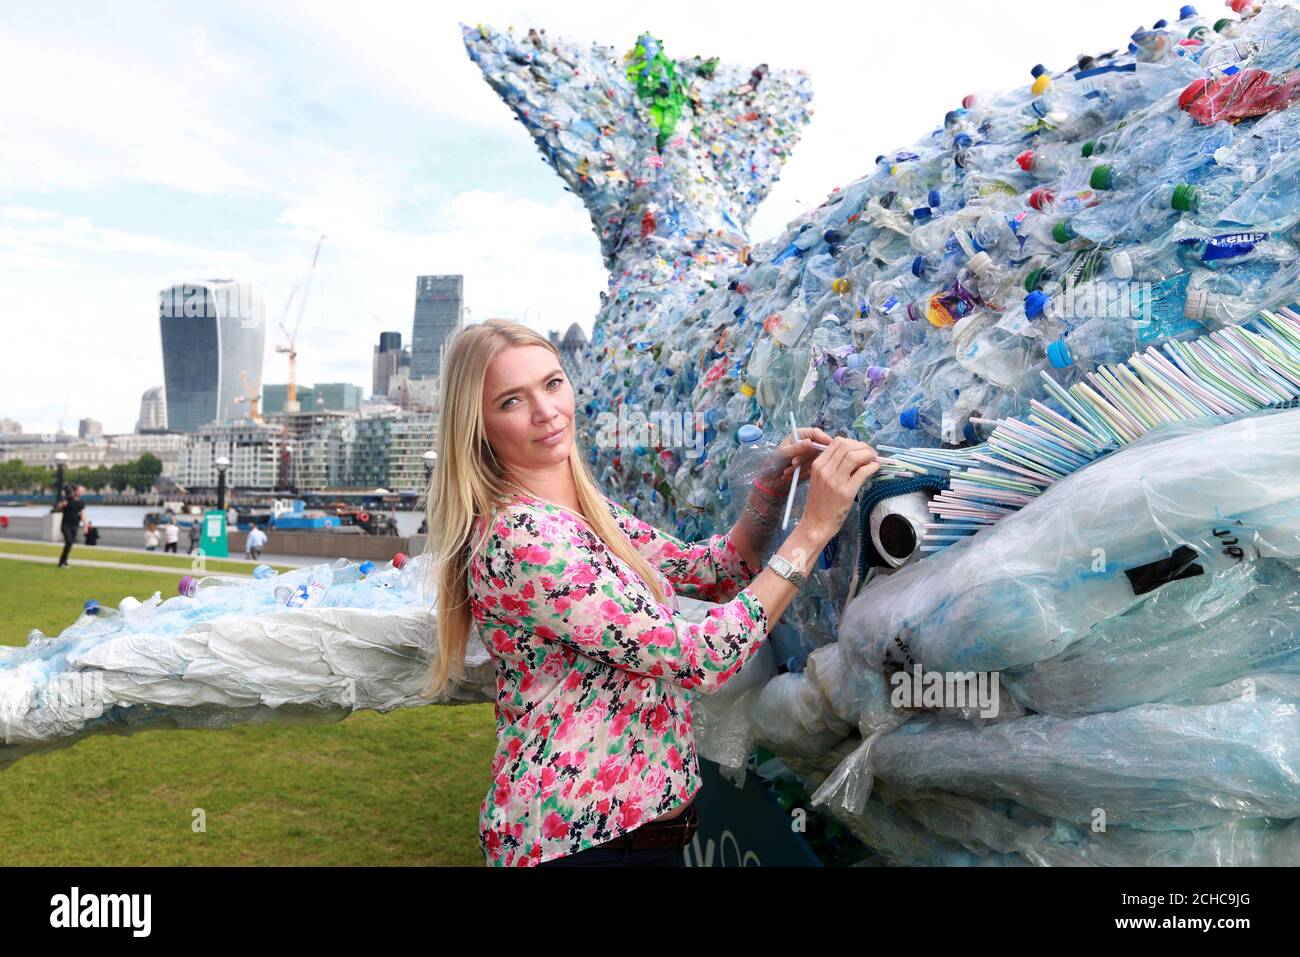 Jodie Kidd joins Sky Ocean Rescue to unveil a 10-metre long whale at Potters Fields Park in London, which is made entirely from recycled plastic recovered from the ocean, beach cleans and local recycling plants to raise awareness of the issue of ocean health. PRESS ASSOCIATION Photo. Picture date: Tuesday August 15, 2017. Photo credit should read: Matt Alexander/PA Wire PRESS ASSOCIATION Photo. Picture date: Tuesday August 15, 2017. See PA story ENVIRONMENT Whale. Photo credit should read: Matt Alexander/PA Wire Stock Photo